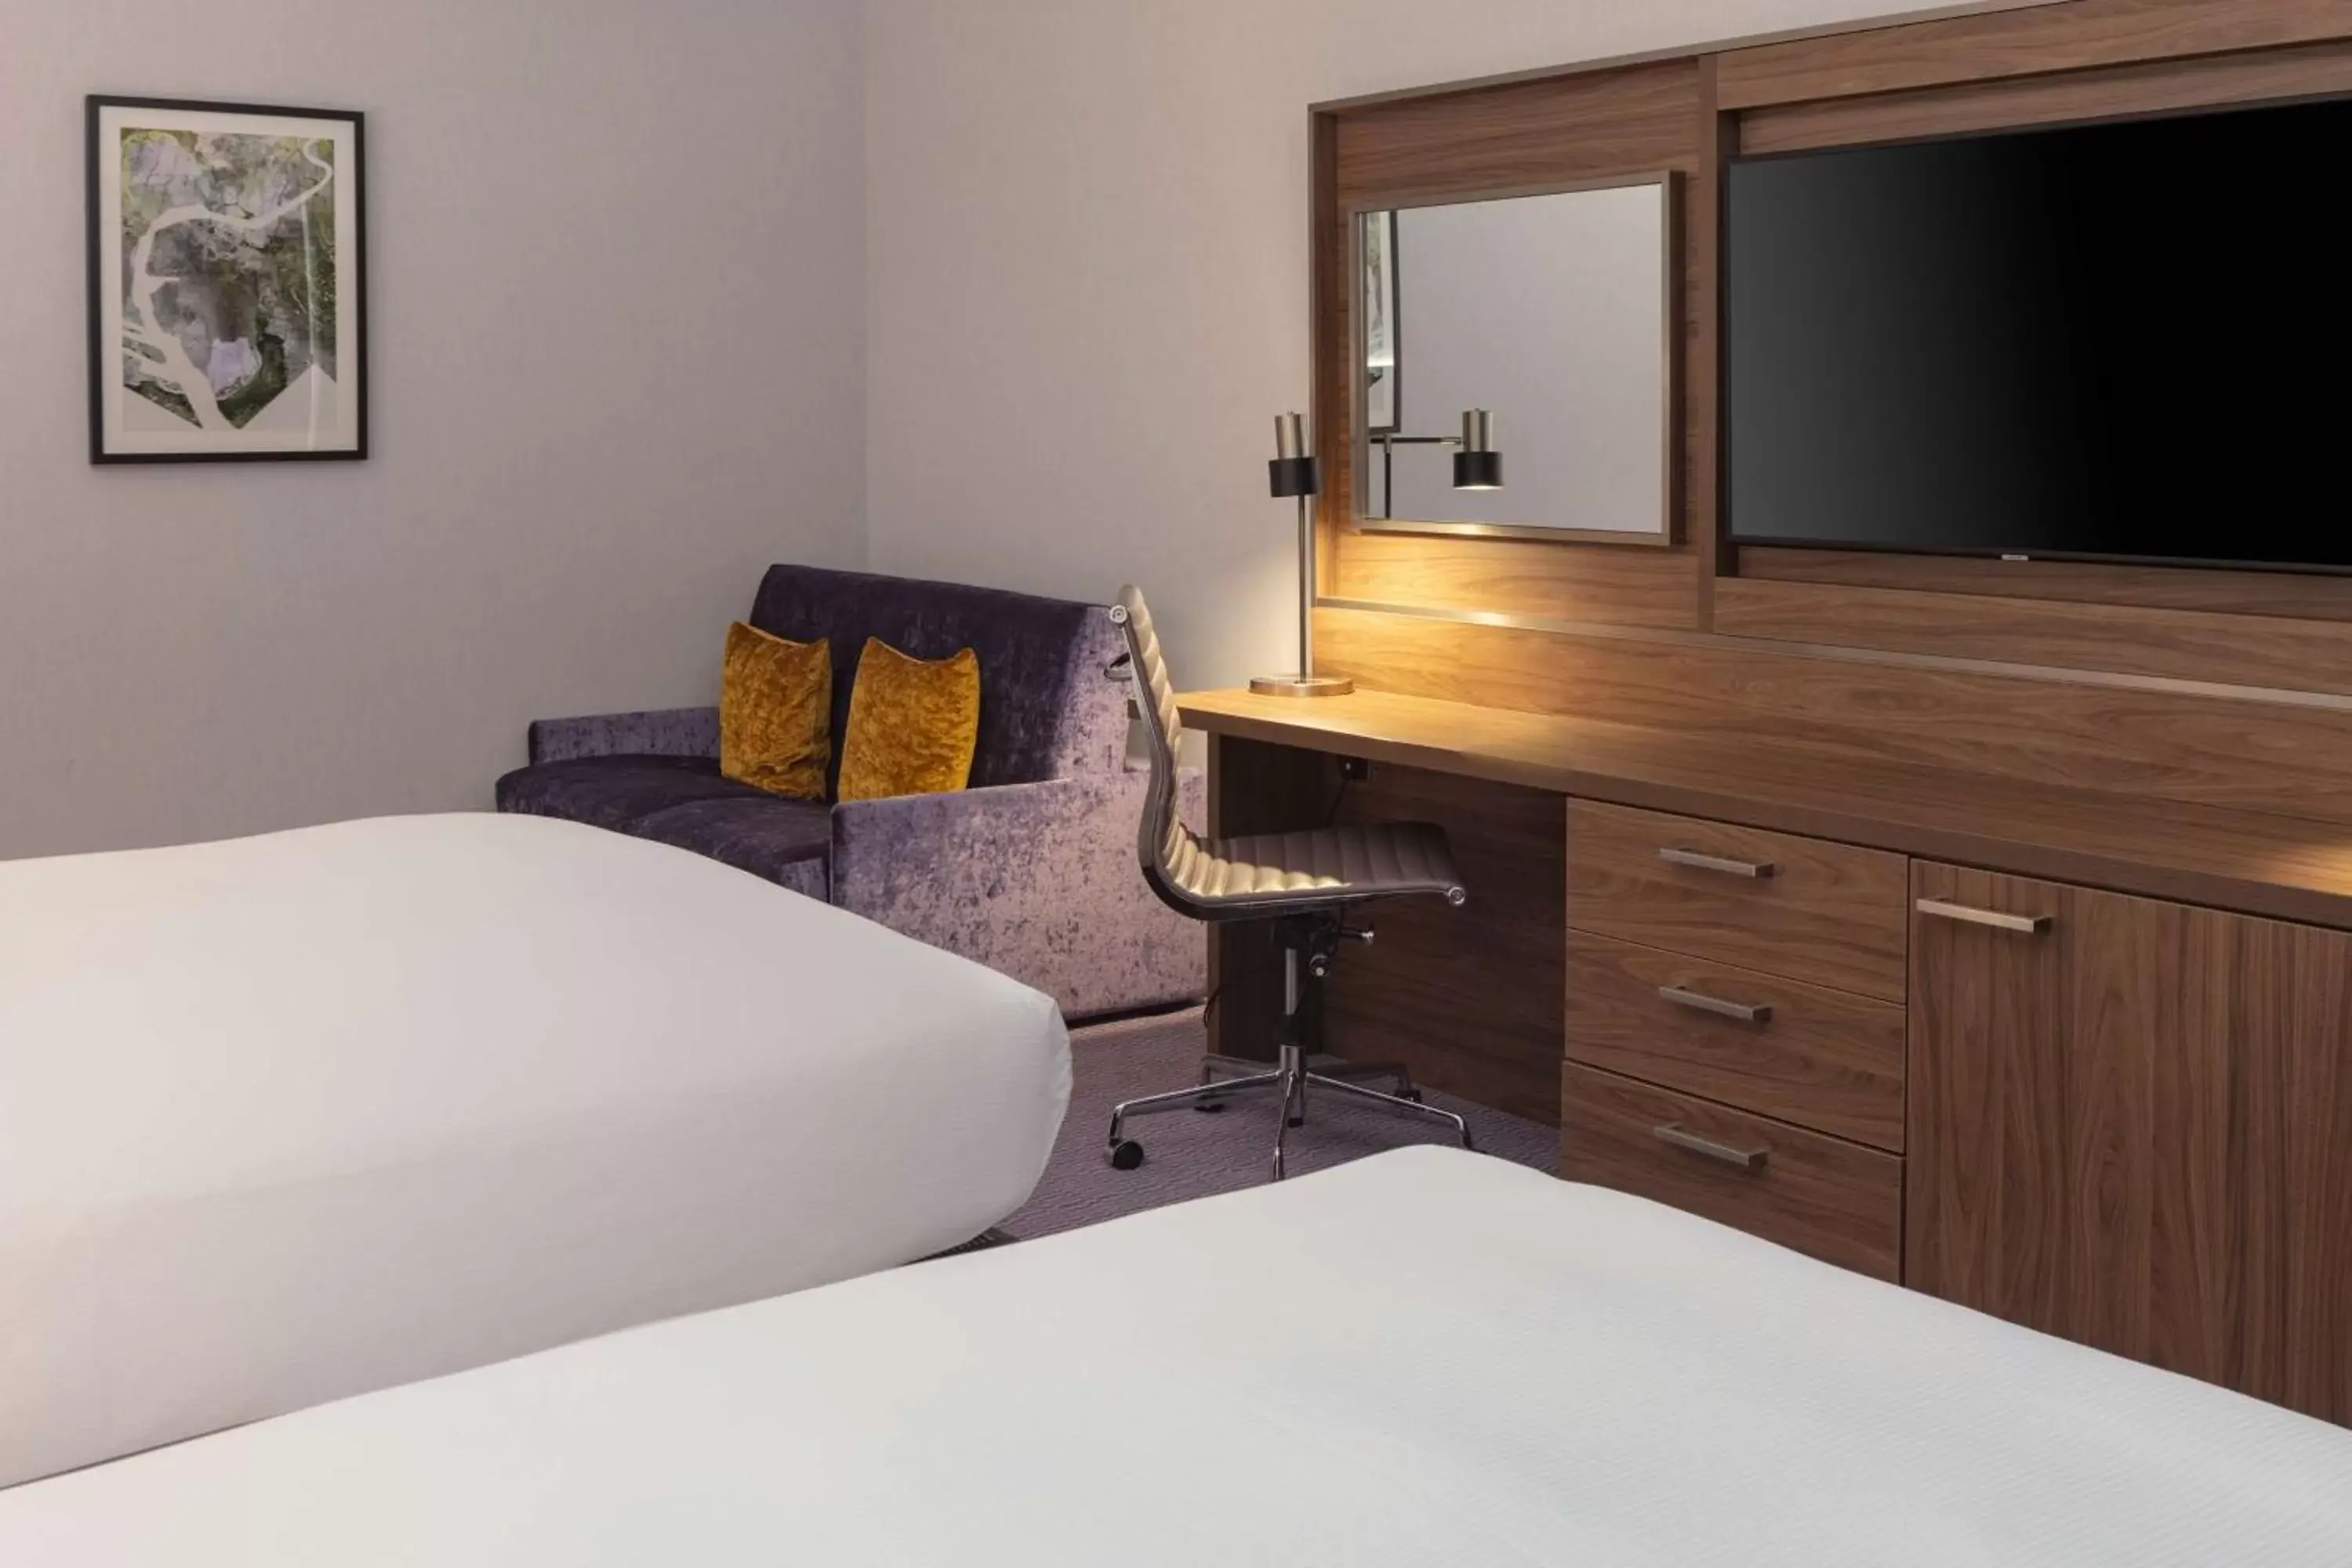 Bed in DoubleTree by Hilton Edinburgh Airport